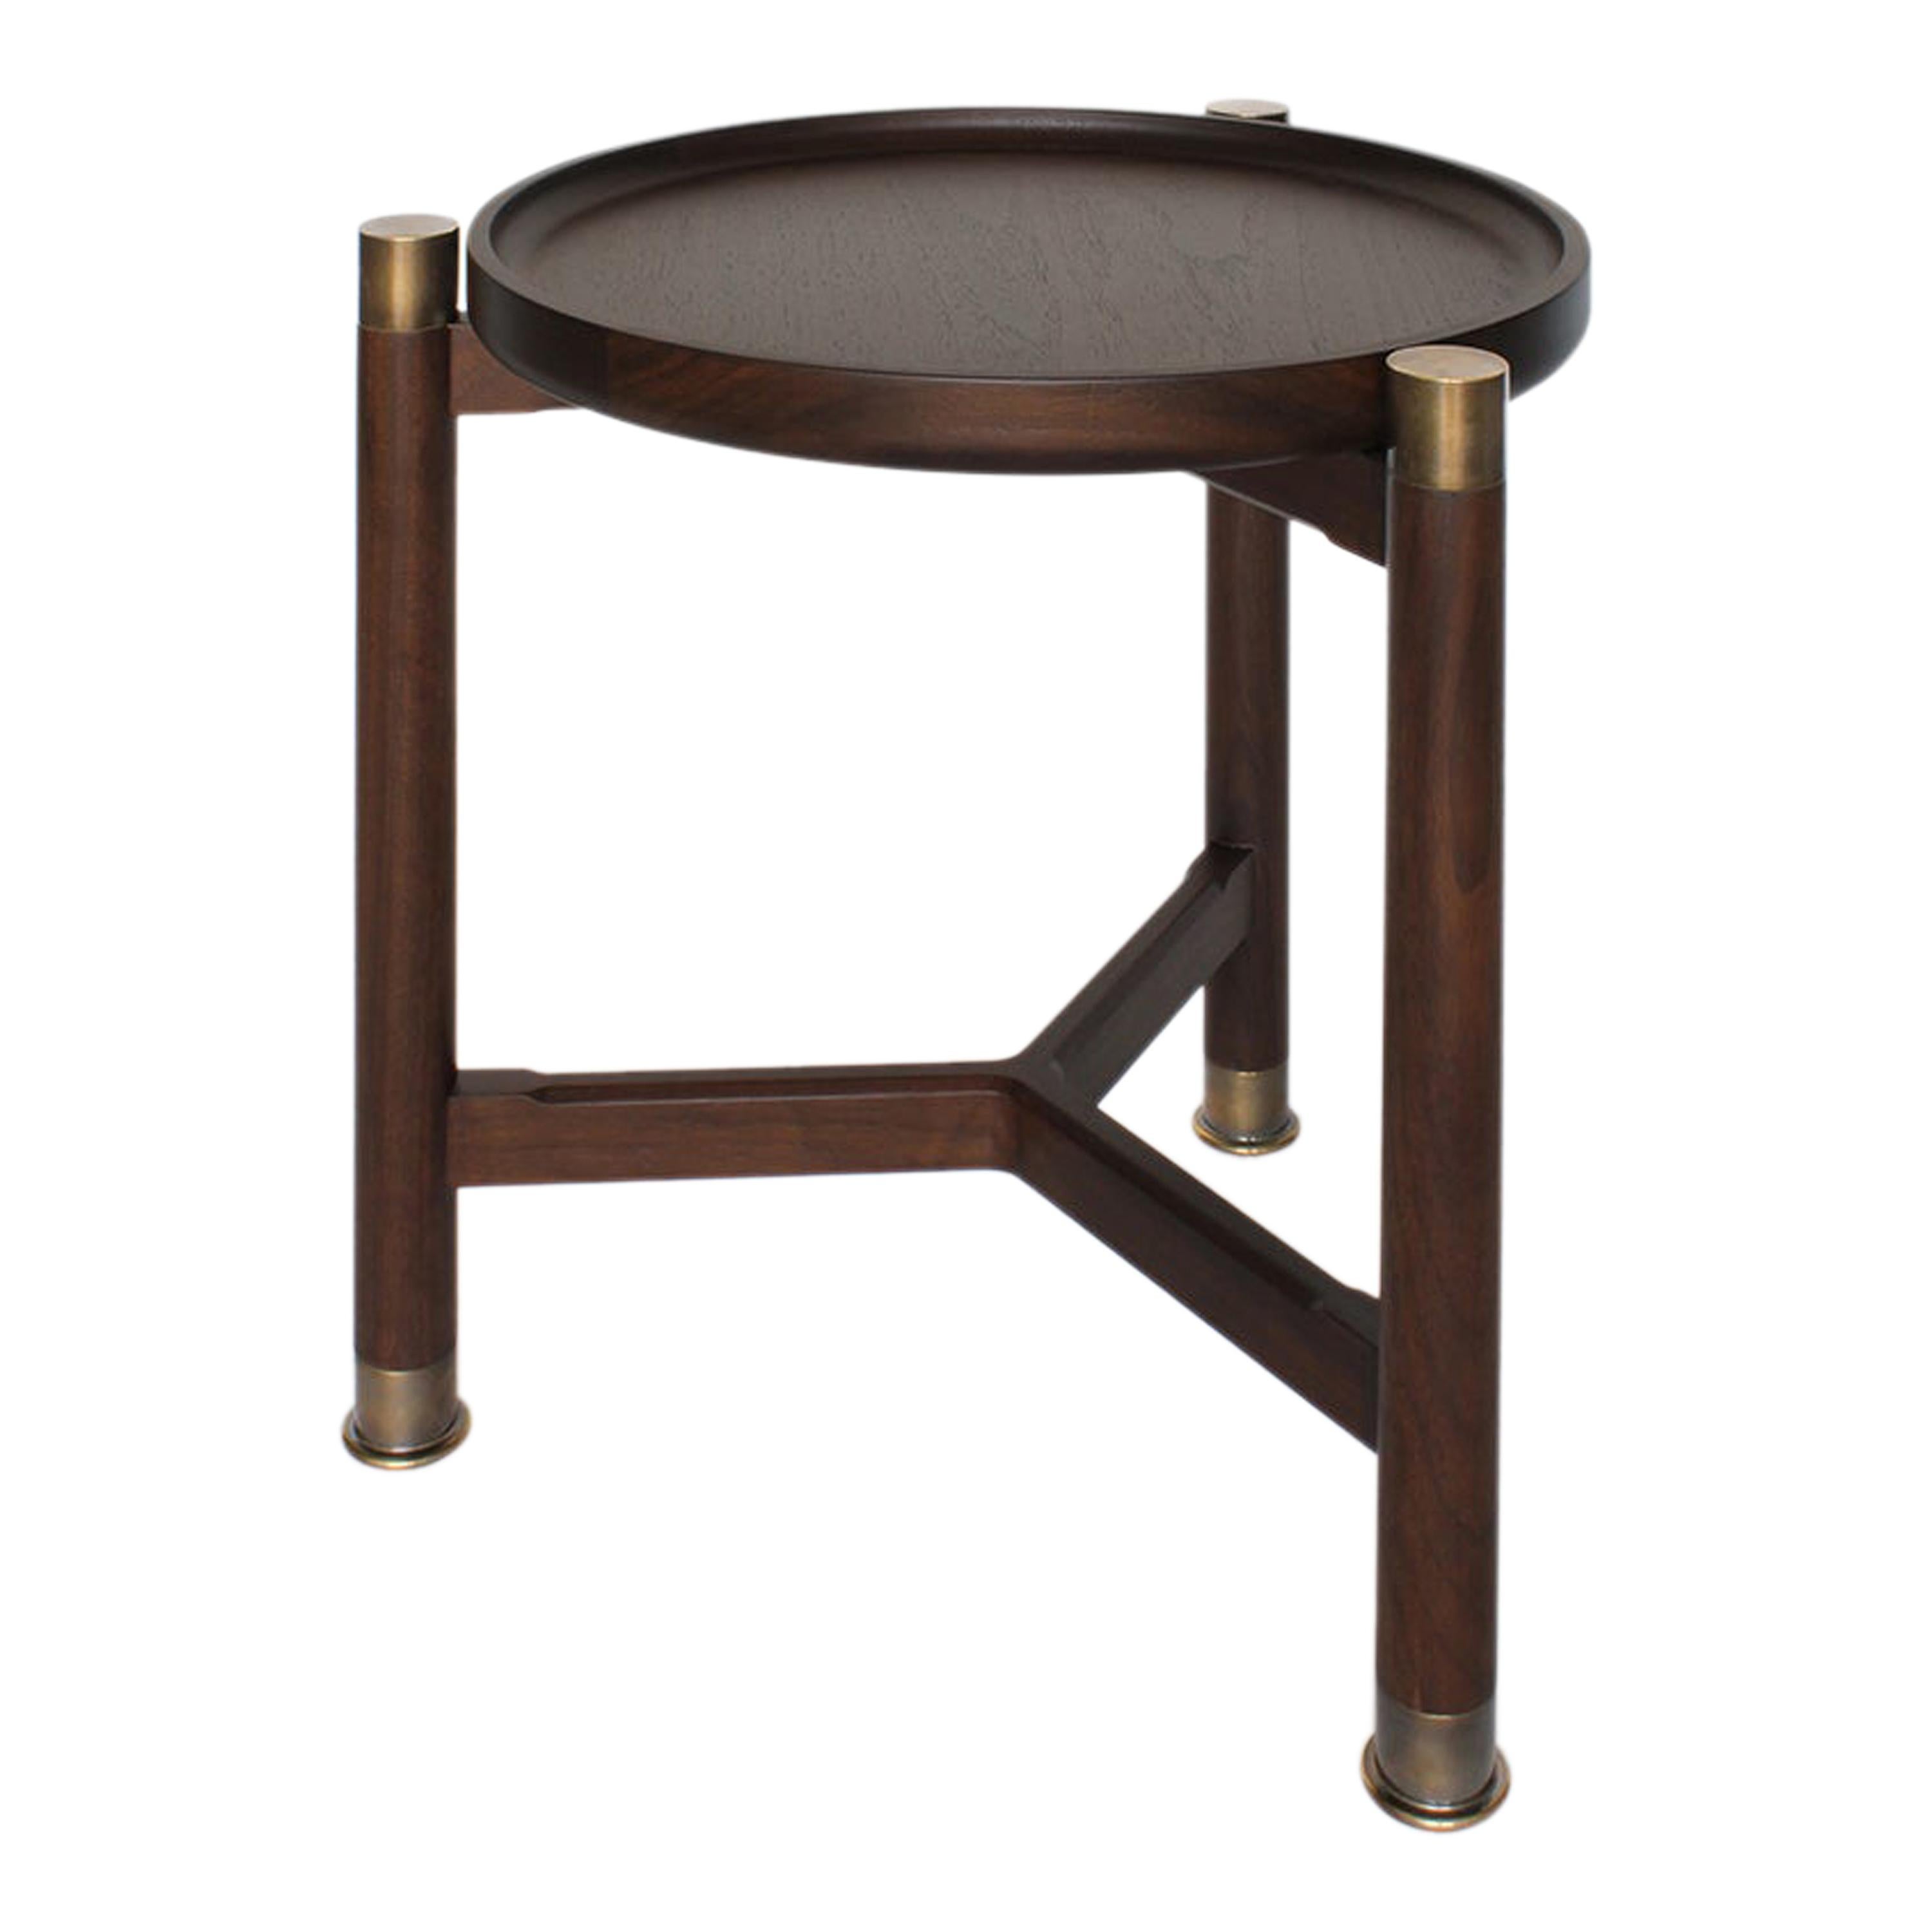 Otto Round Accent Table in Medium Walnut with Antique Brass Fittings